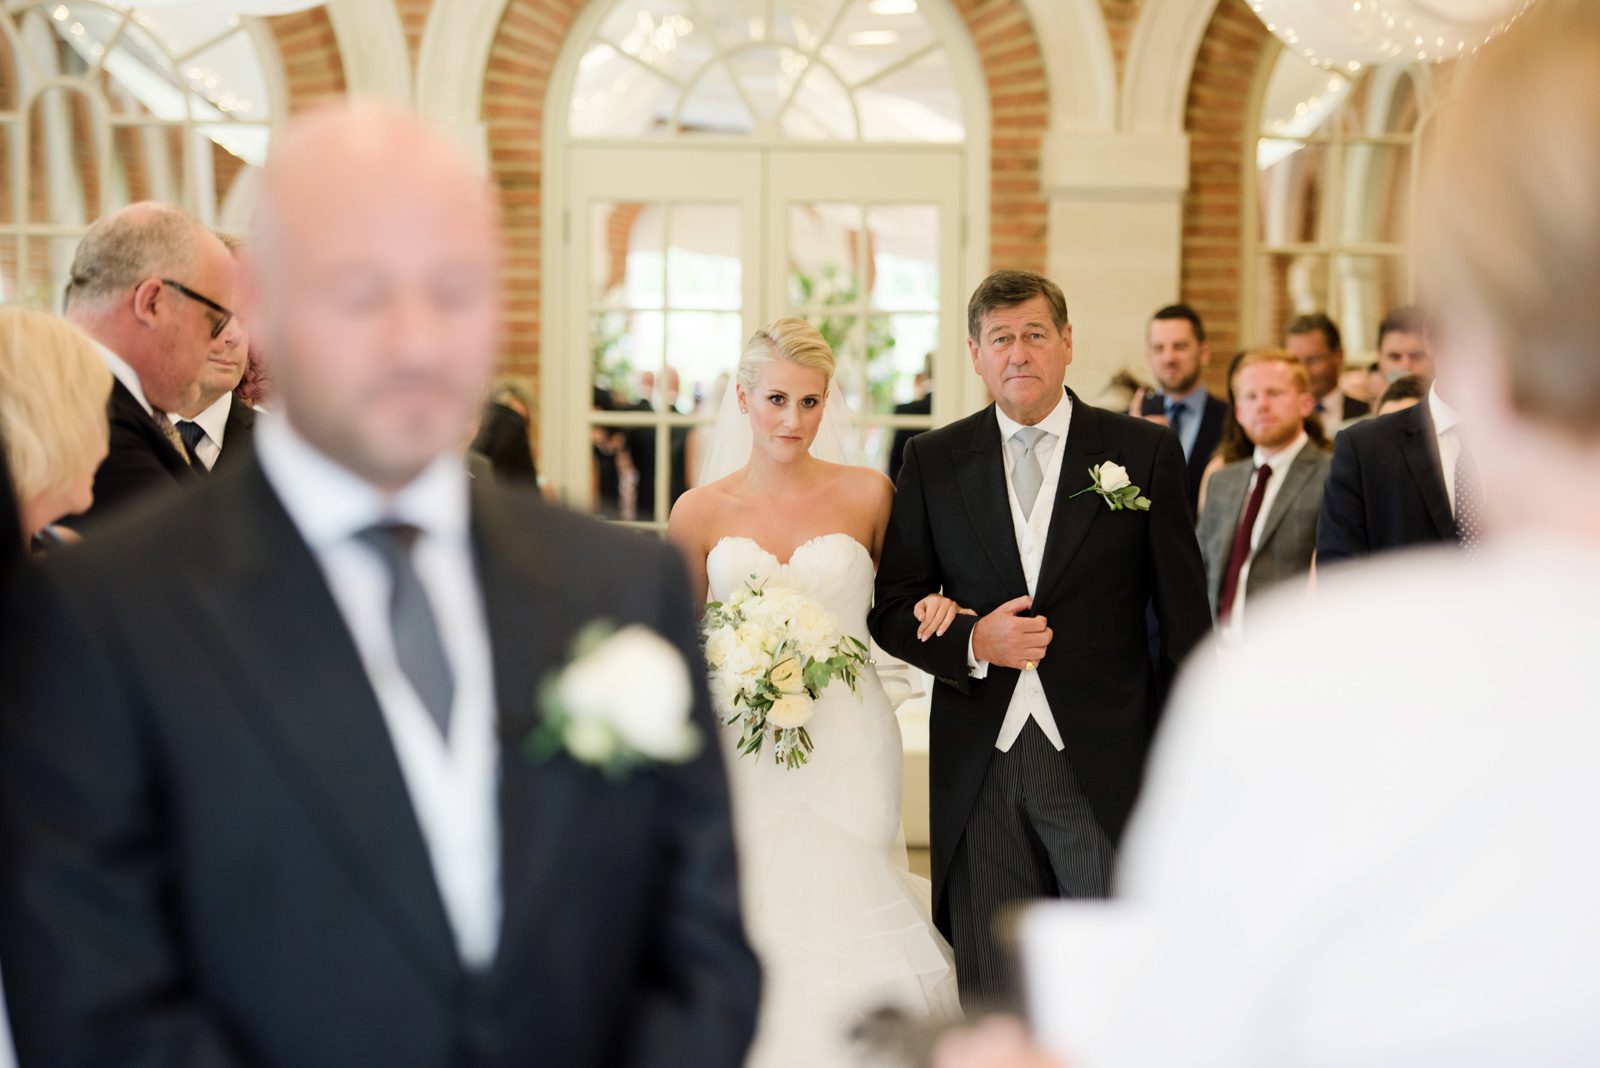 Wedding ceremonies in the Orangery at Great Fosters Hotel.